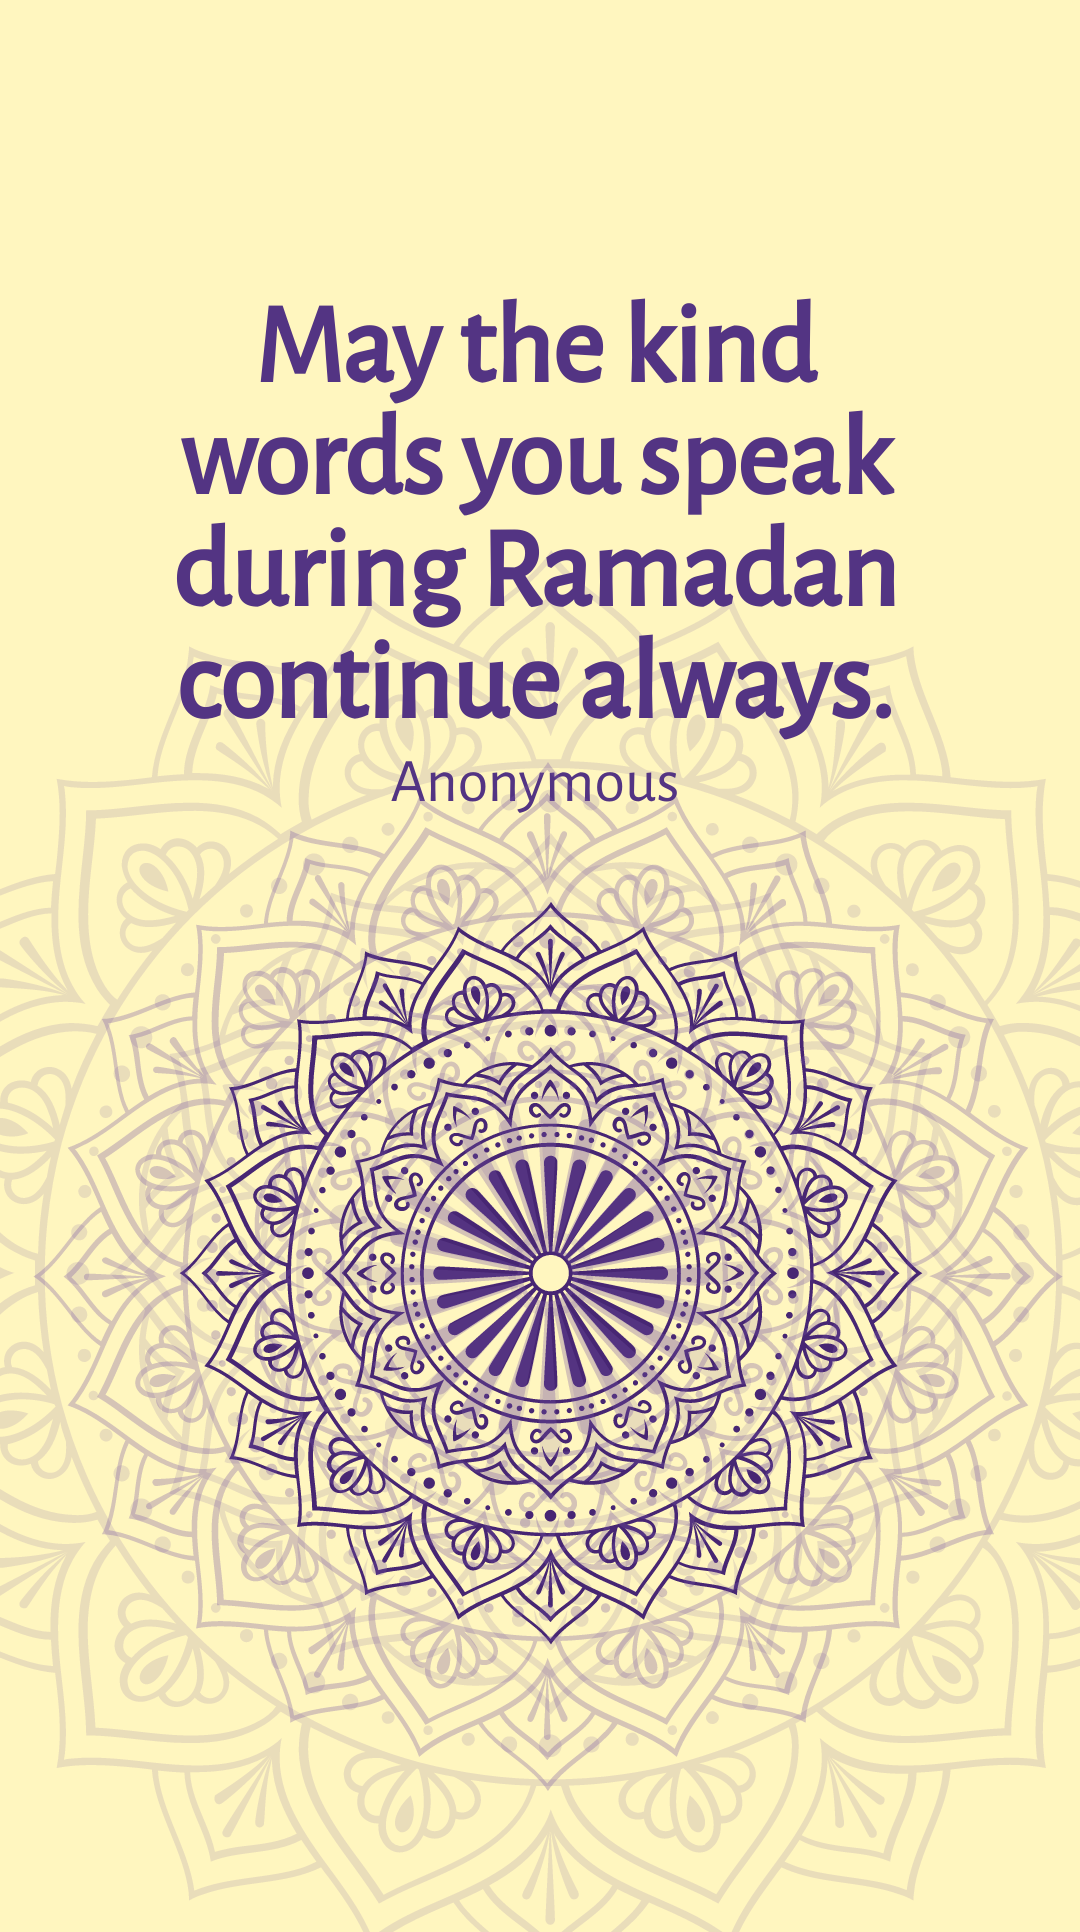 Free Anonymous - May the kind words you speak during Ramadan continue always. in JPG